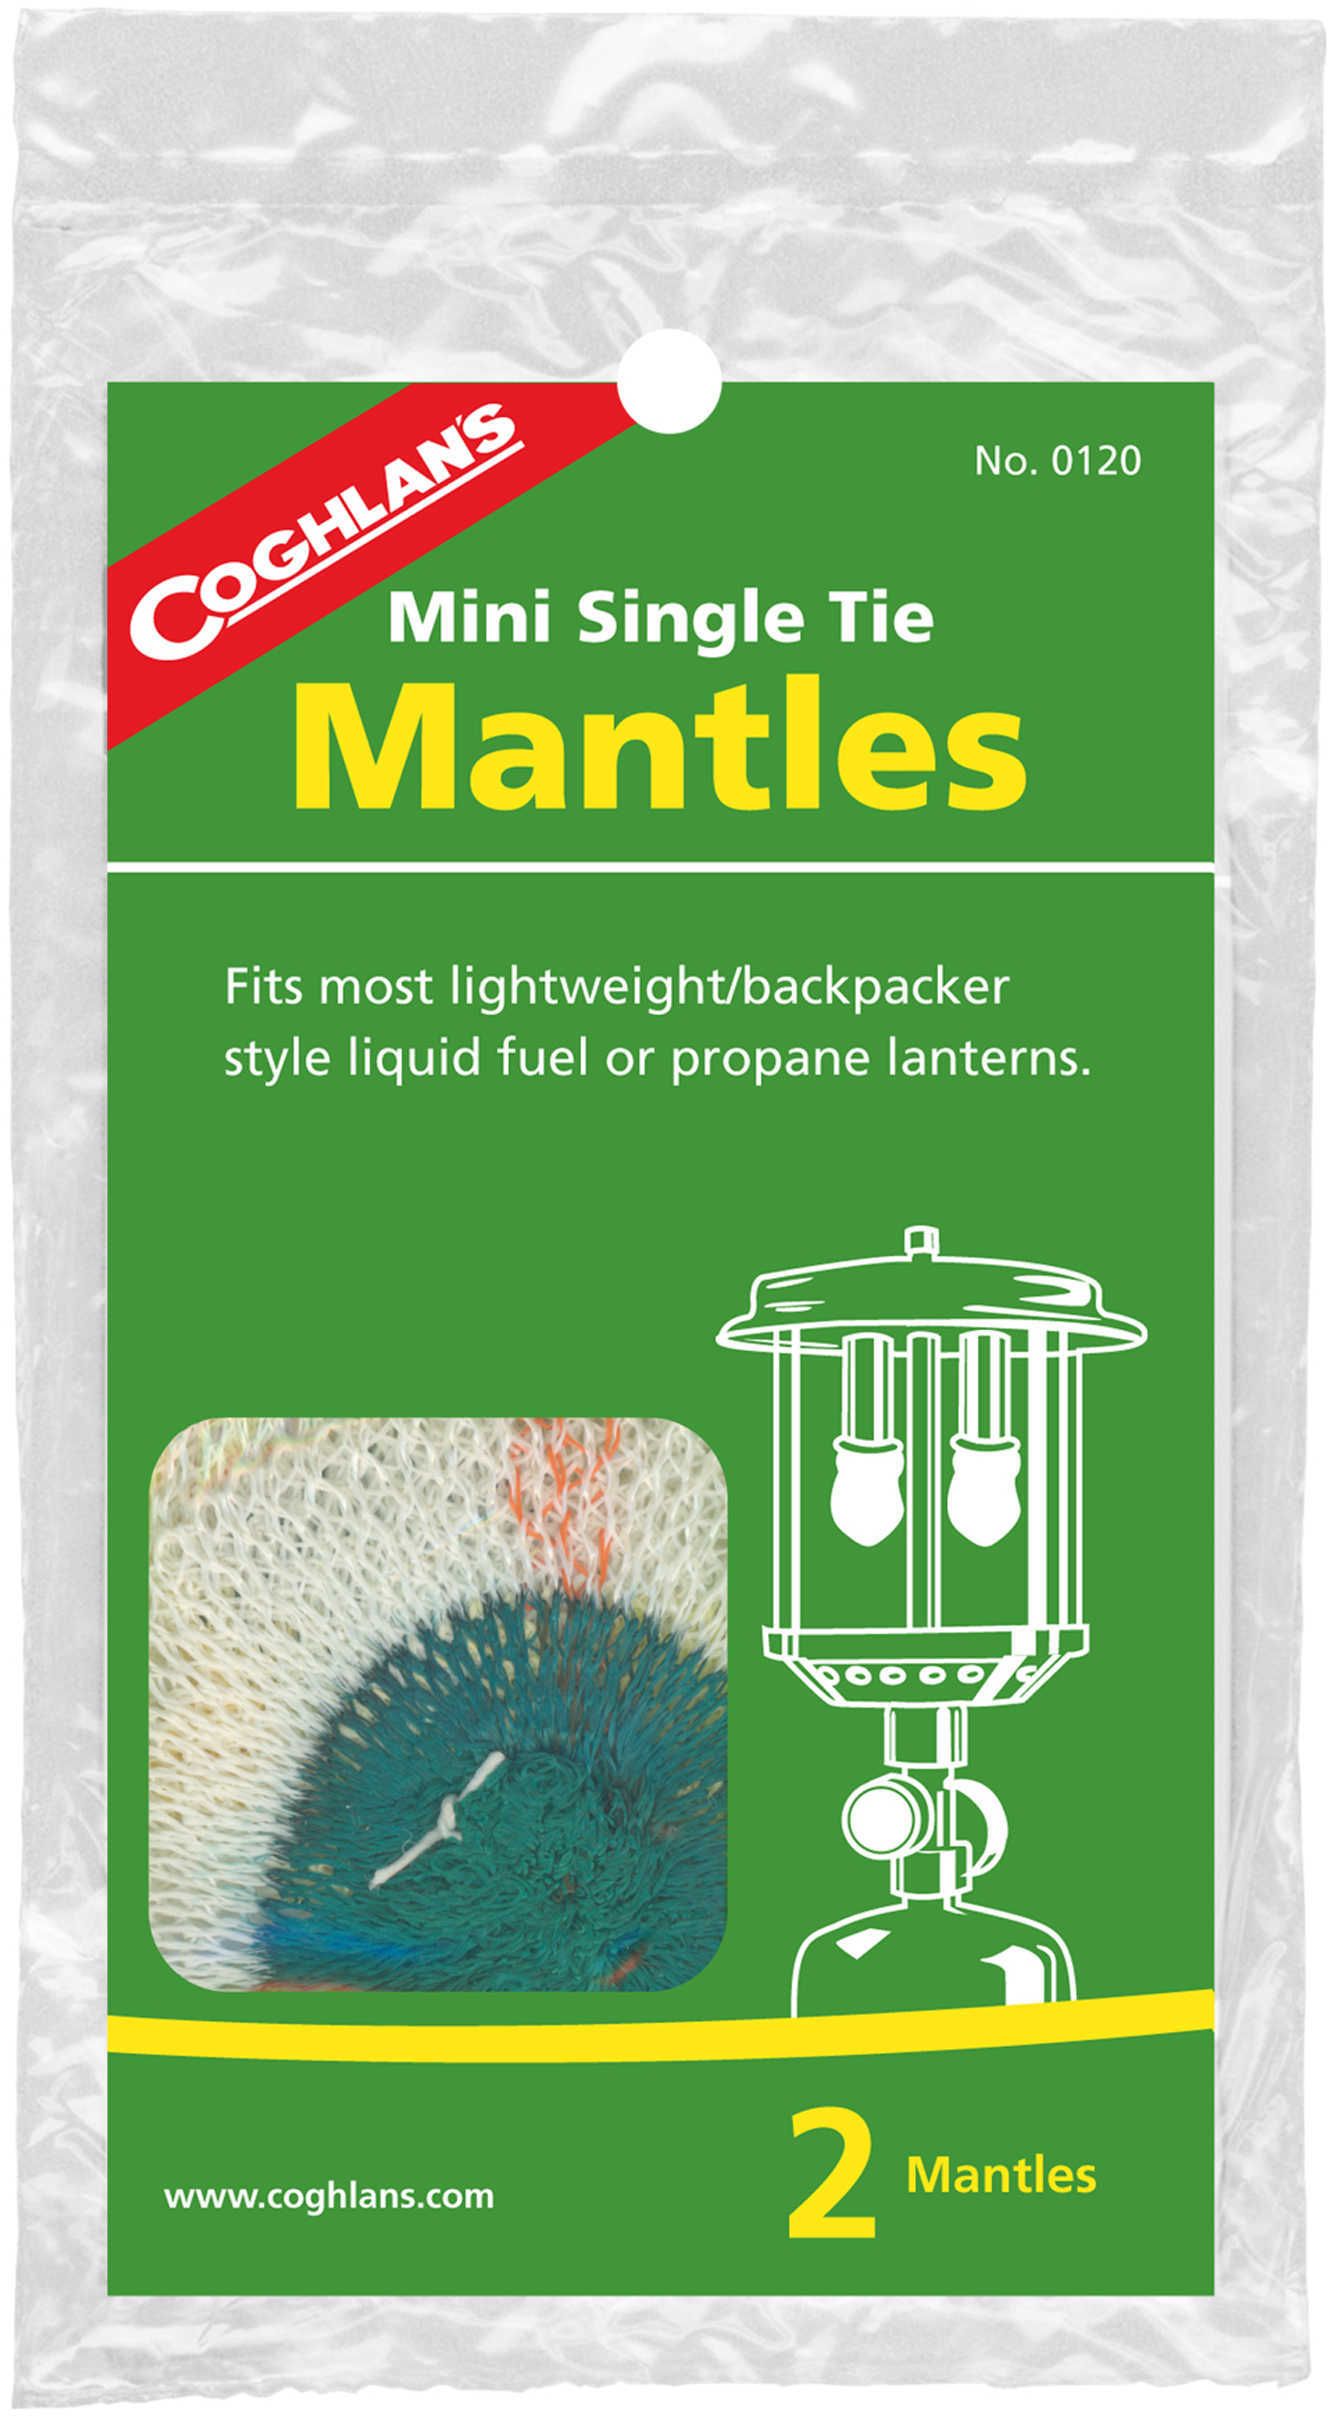 Coghlans Mantle Replacements Mini Single Tie, 2 Pack Md: 0120